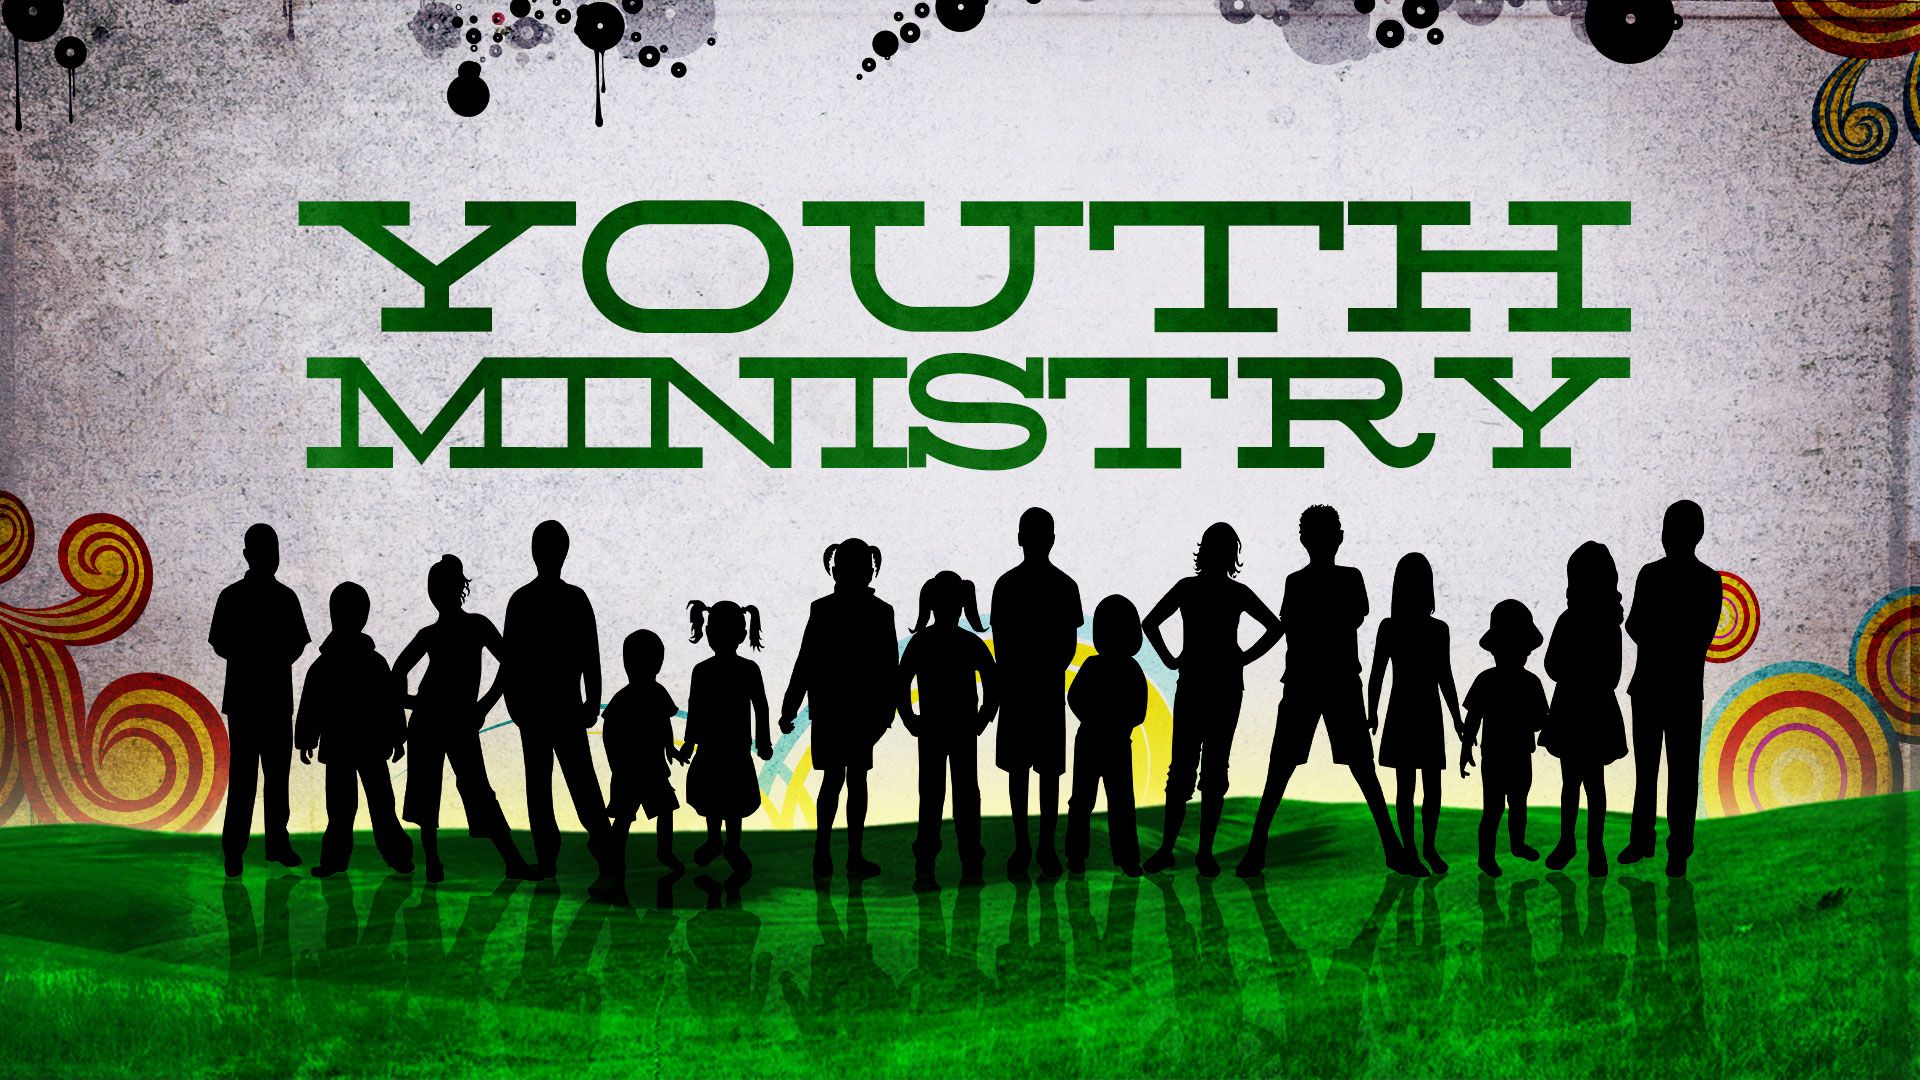 Pictures > youth ministry backgrounds